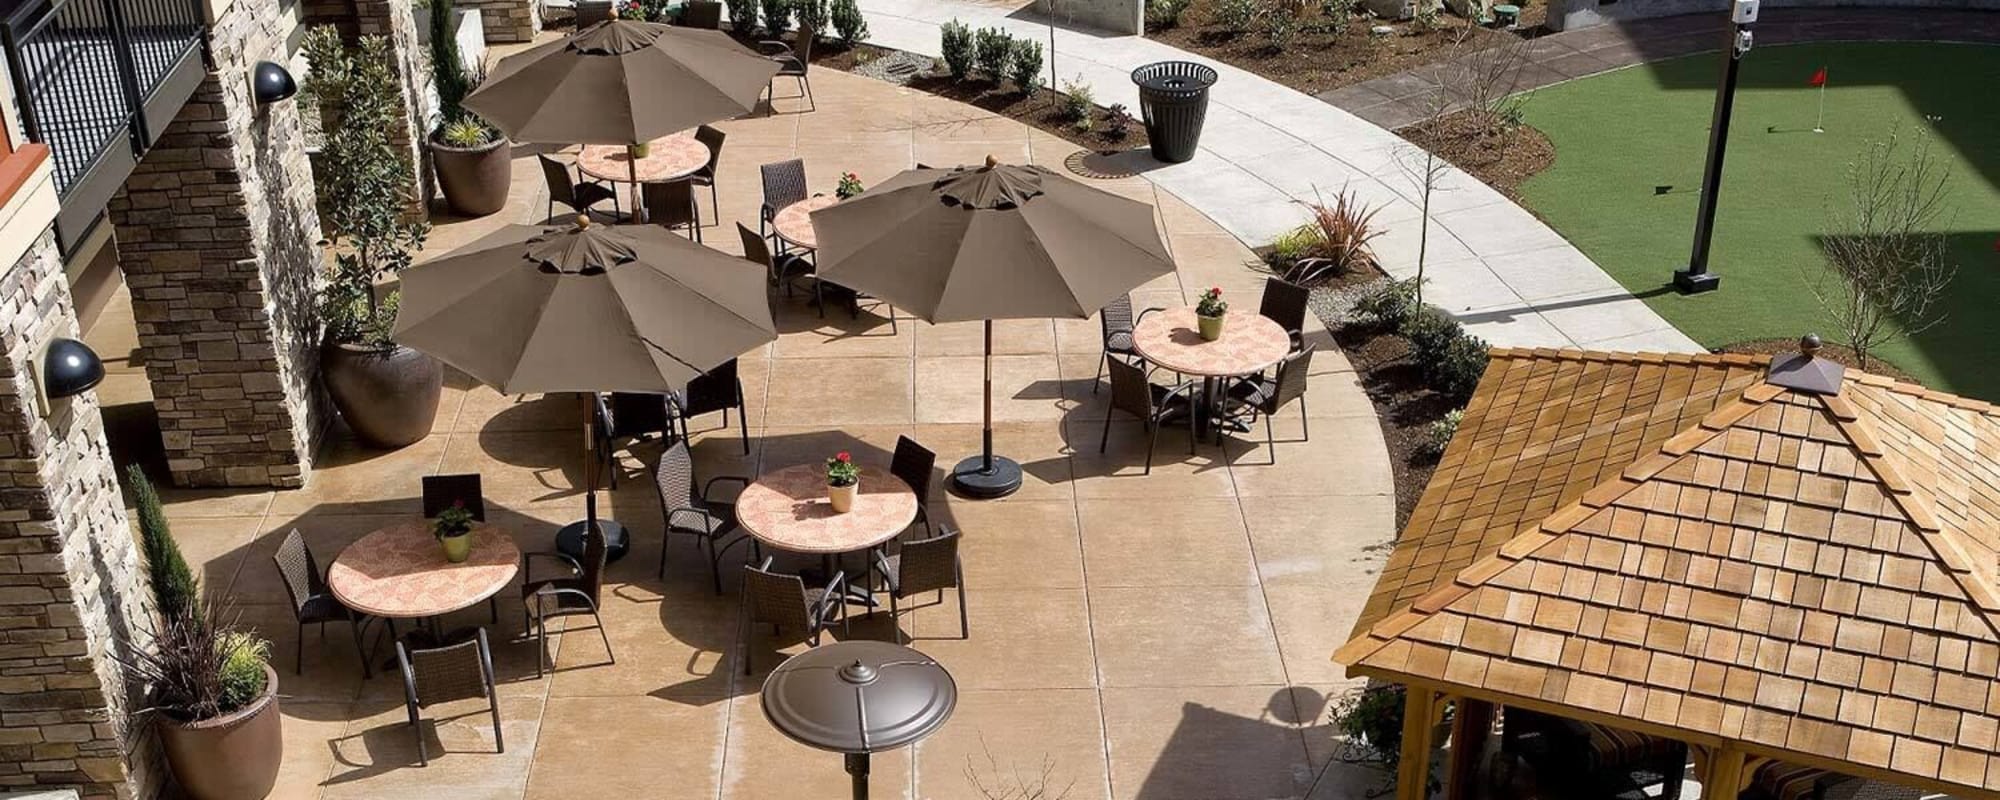 Gorgeous outdoor patio with gazebo at The Springs at Tanasbourne in Hillsboro, Oregon